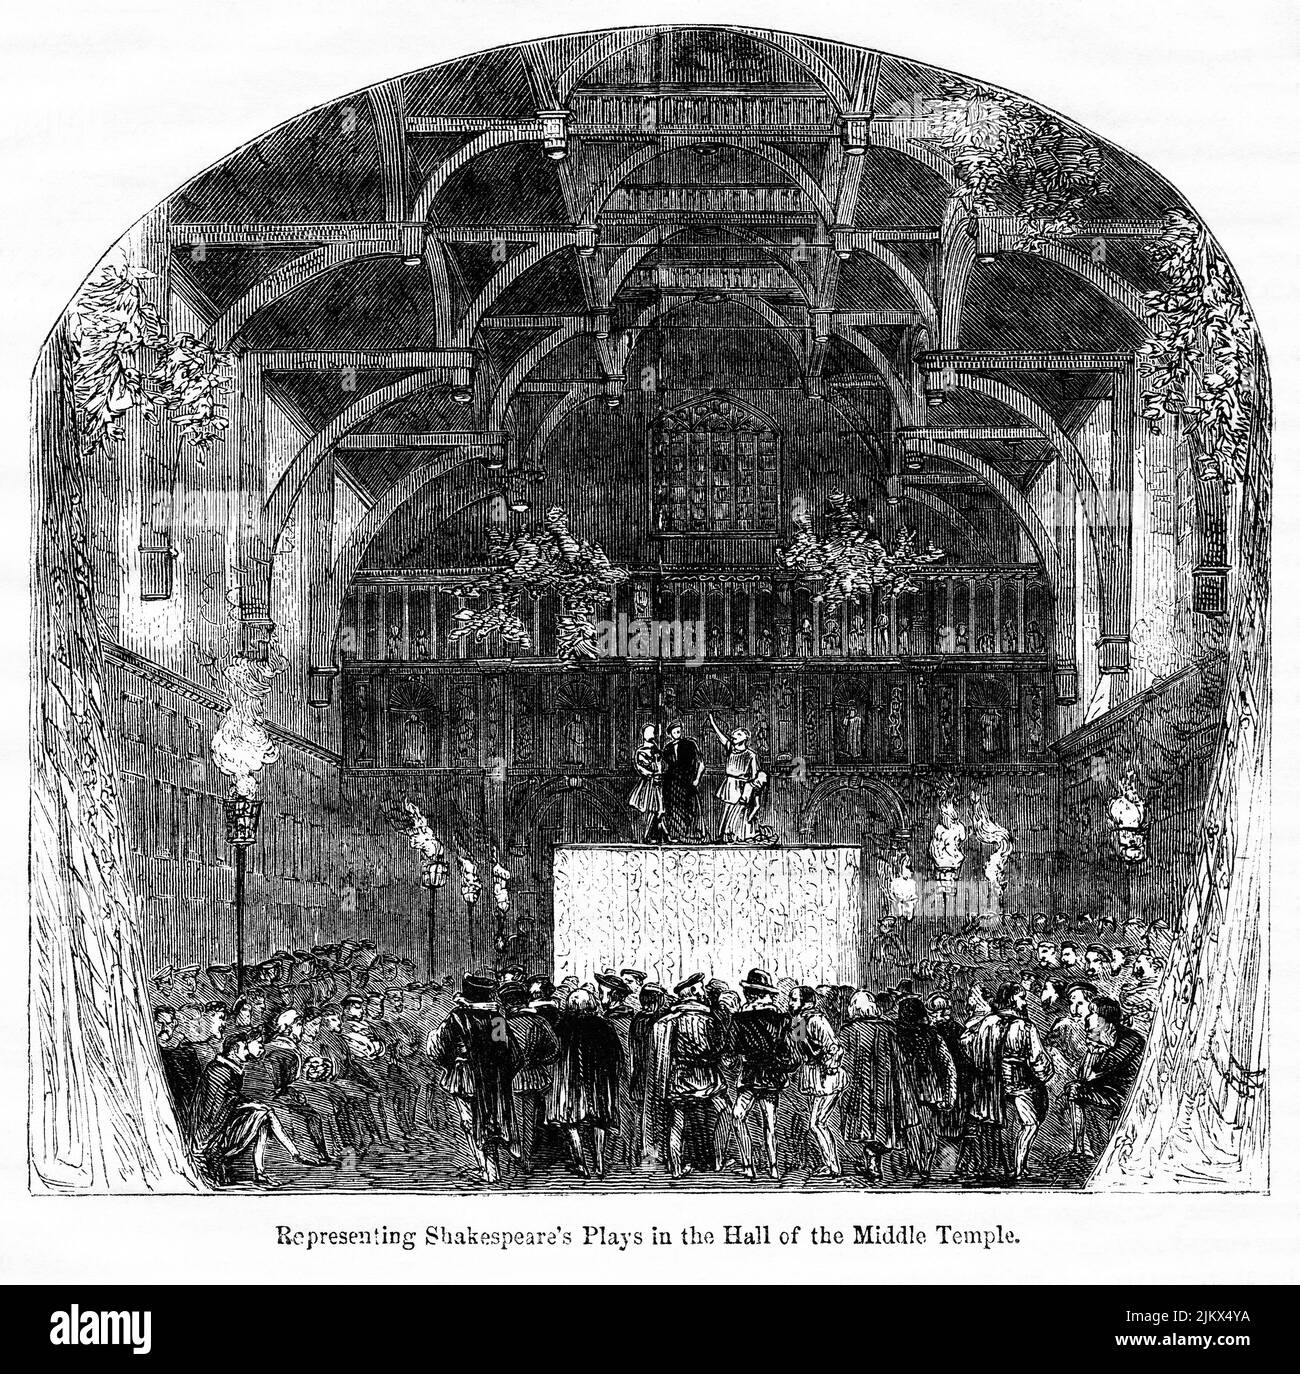 Representing Shakespeare’s Plays in the Hall of the Middle Temple, Illustration from the Book, 'John Cassel’s Illustrated History of England, Volume II', text by William Howitt, Cassell, Petter, and Galpin, London, 1858 Stock Photo